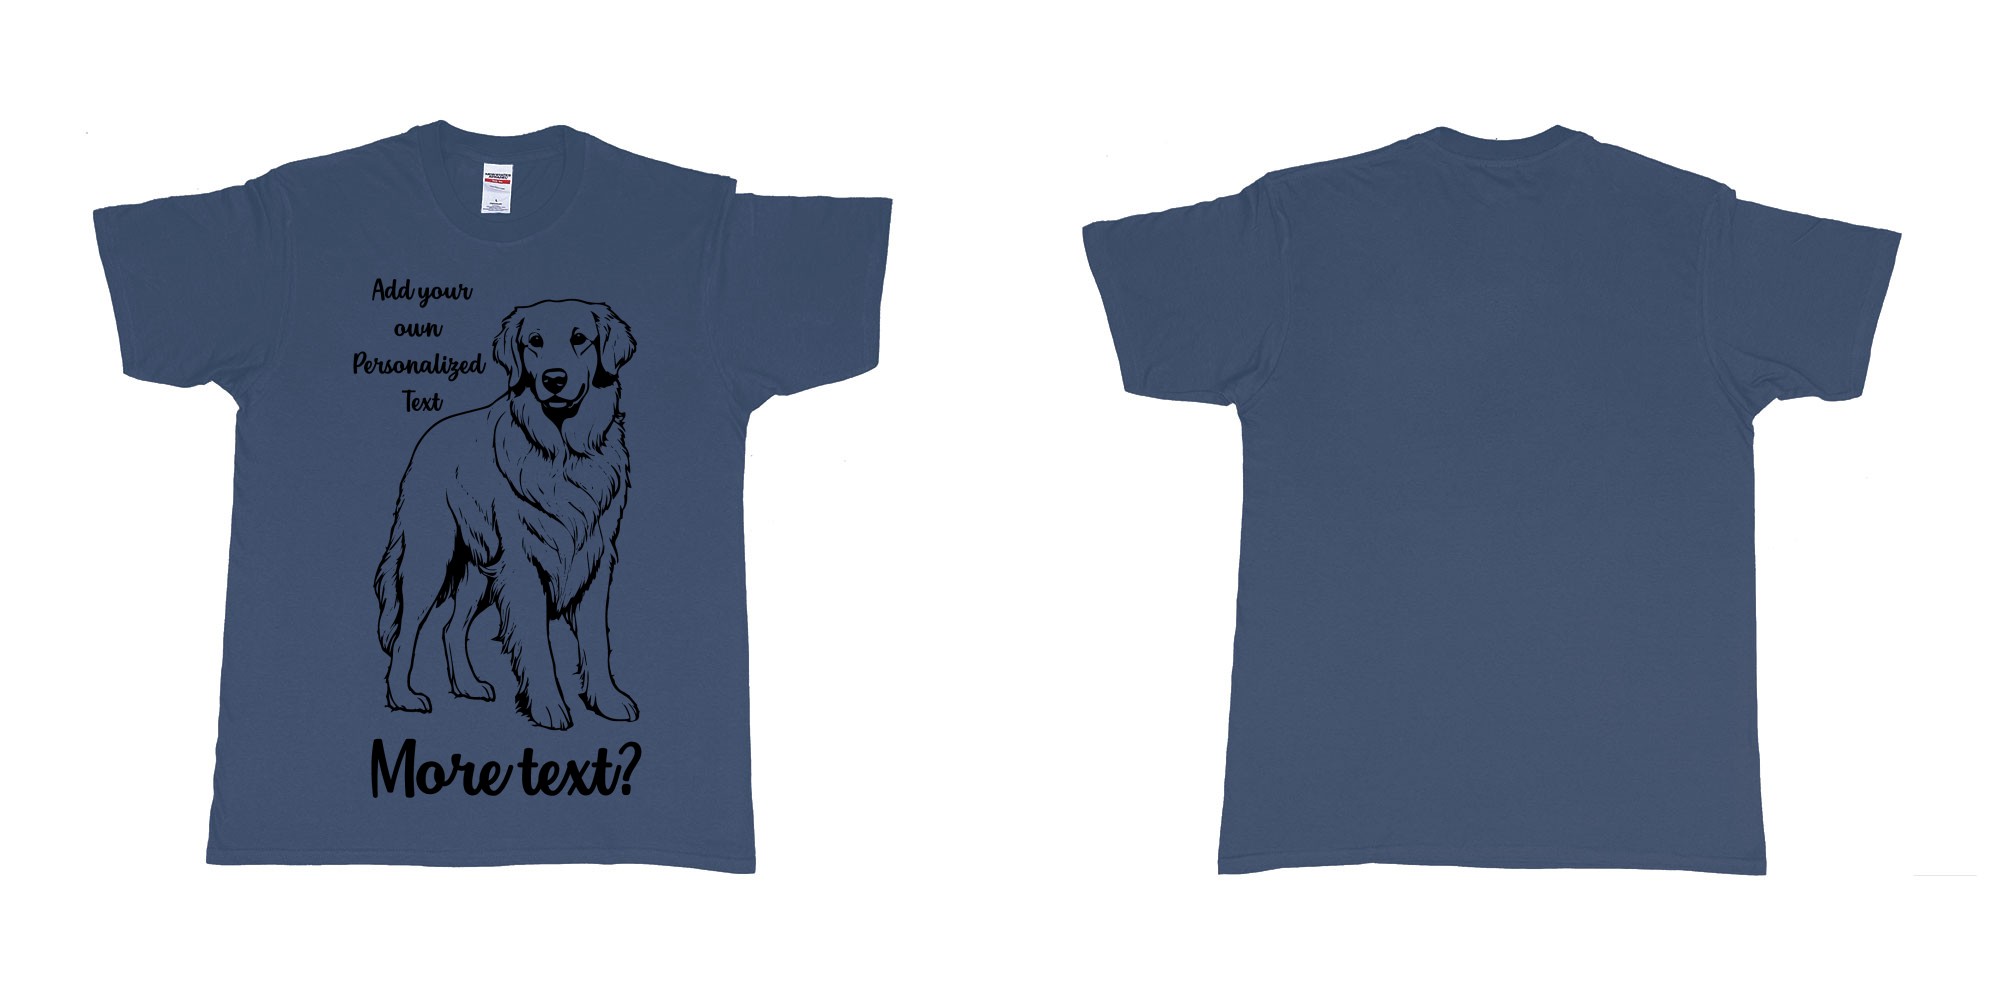 Custom tshirt design golden retriever dog breed personalized text in fabric color navy choice your own text made in Bali by The Pirate Way